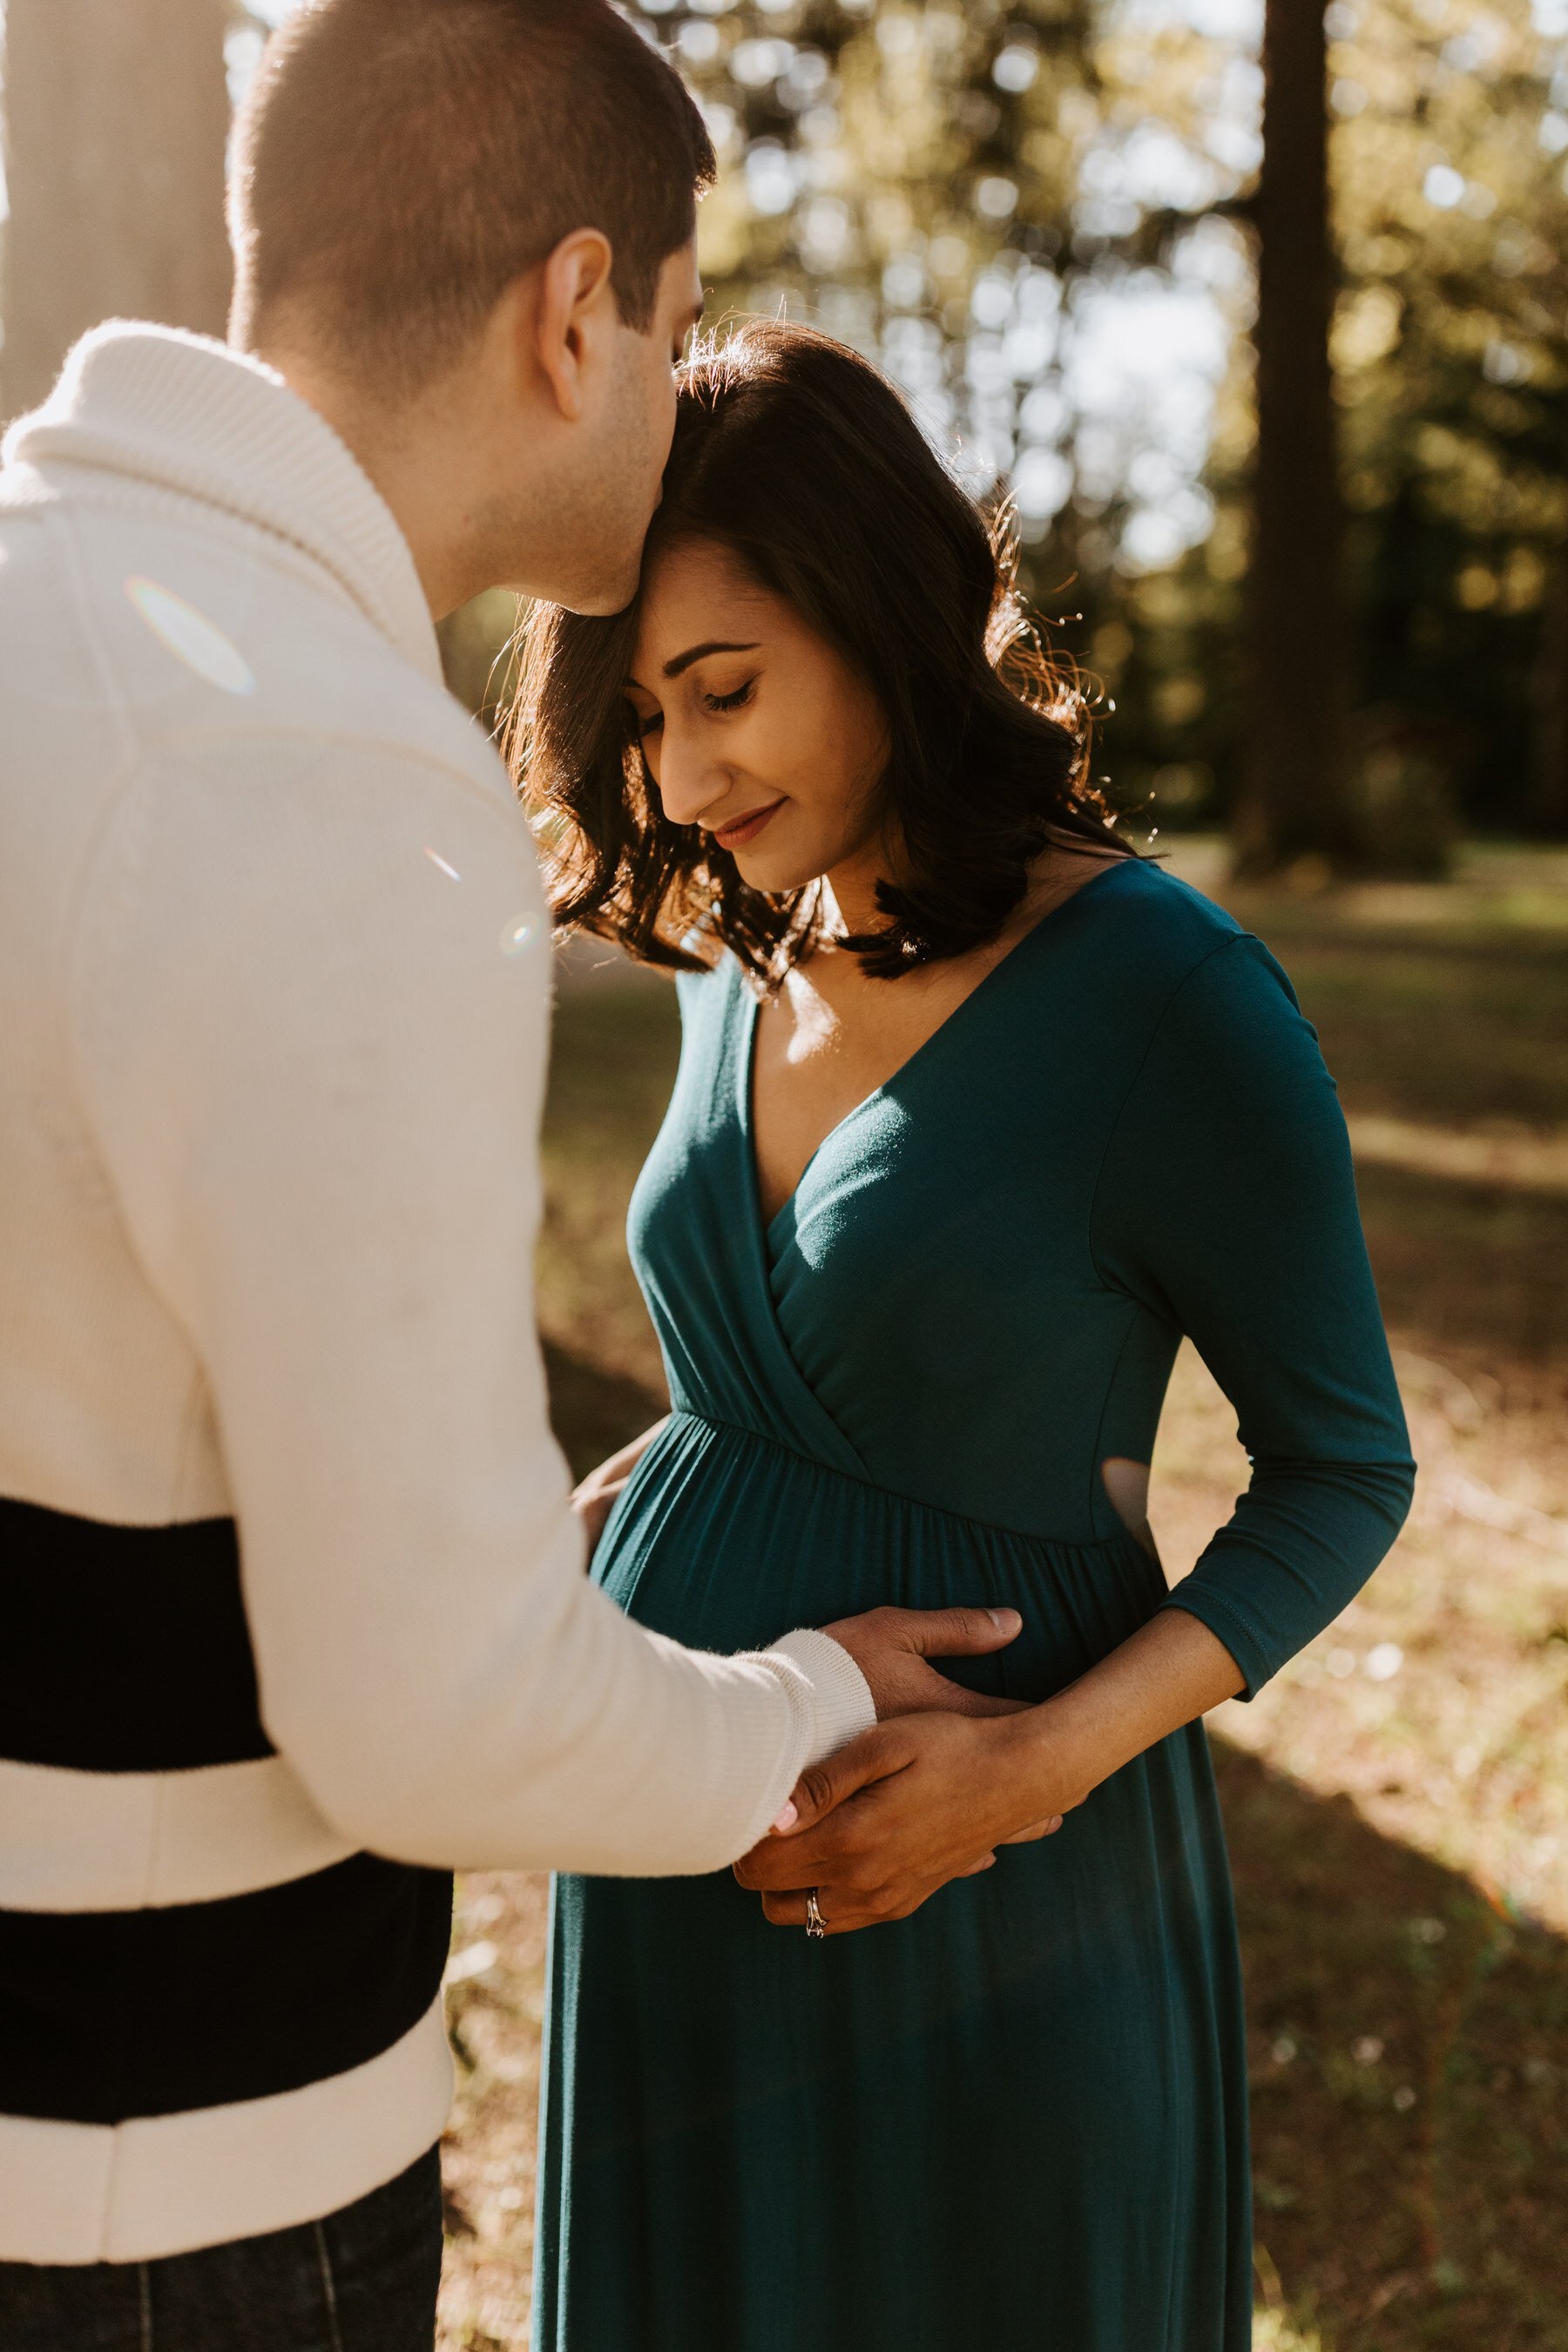 Seattle Maternity Photos | Outdoor forest golden hour maternity session at Lake Wilderness Park in Maple Valley, WA | Tida Svy | www.tidasvy.com